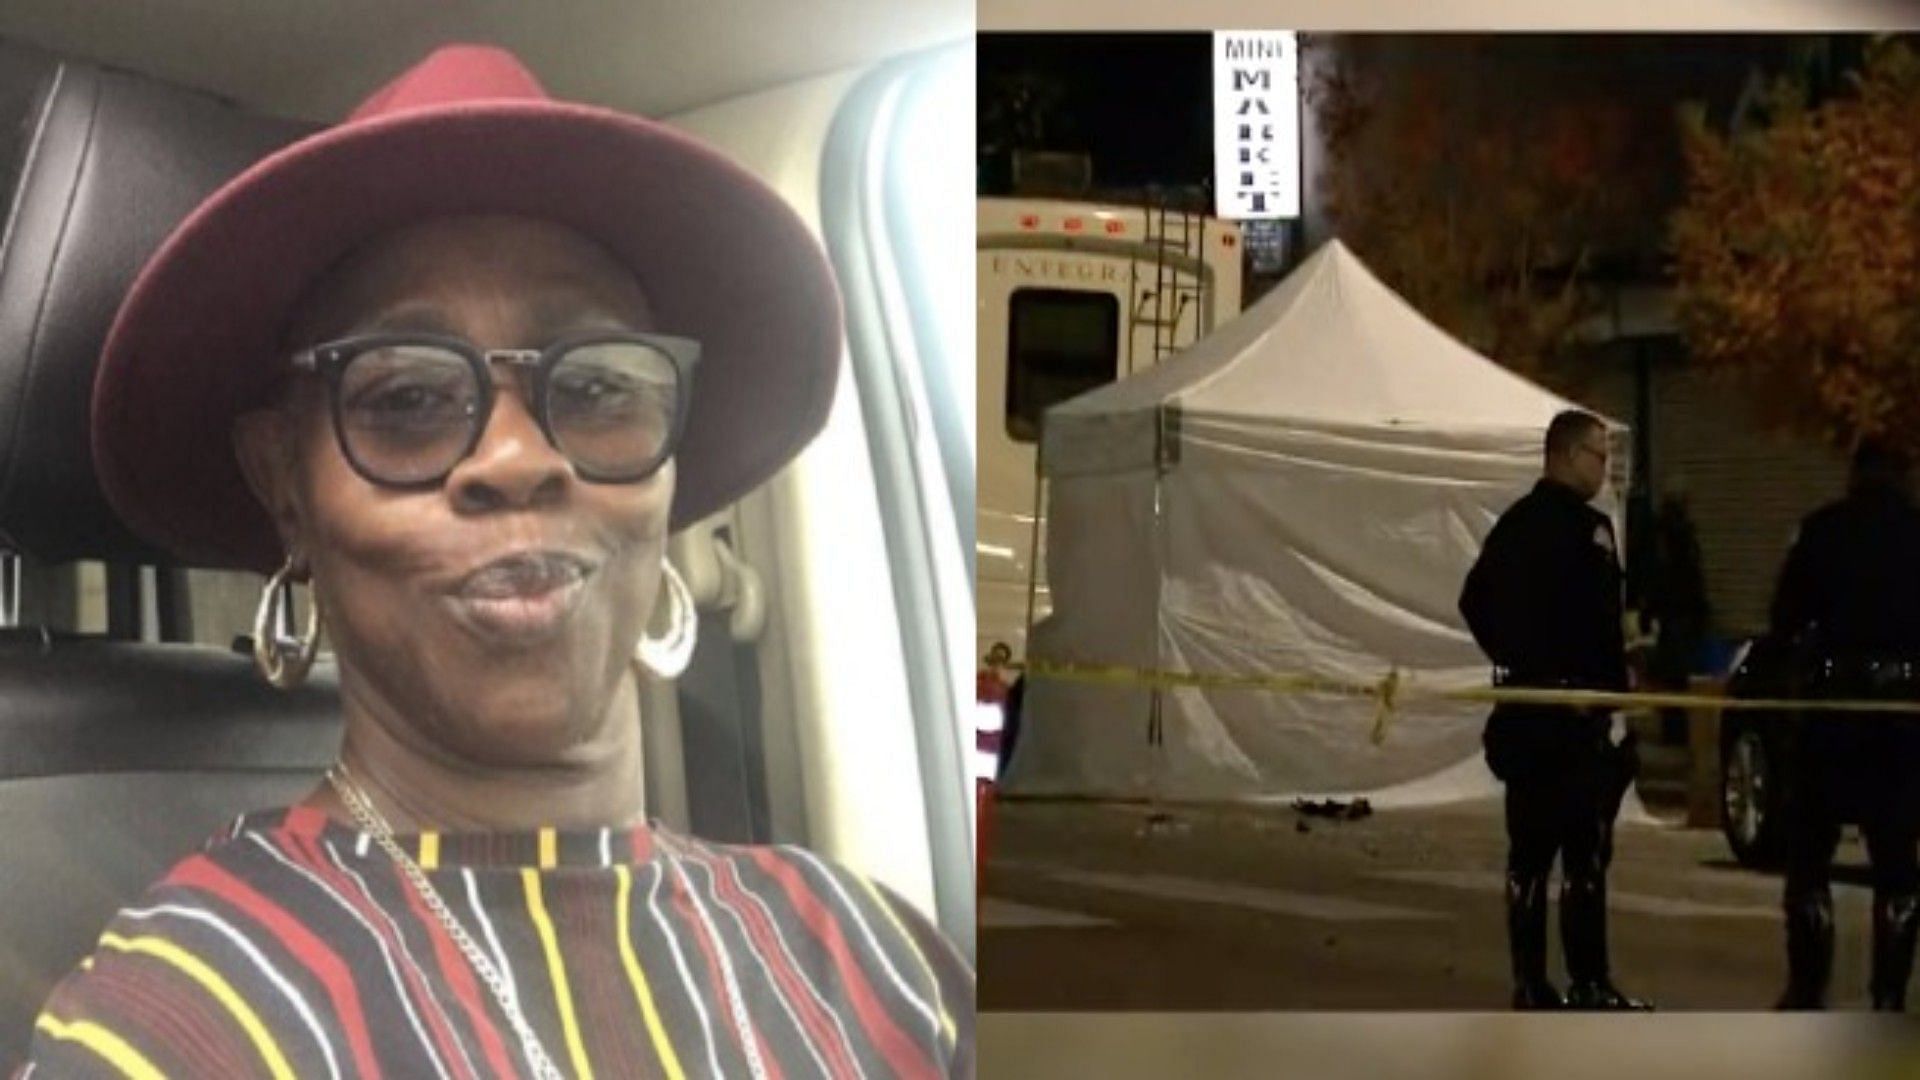 Trina Newman Townsend a Los Angeles pastor was killed in a hit and run (Image via Sumner/Twitter)